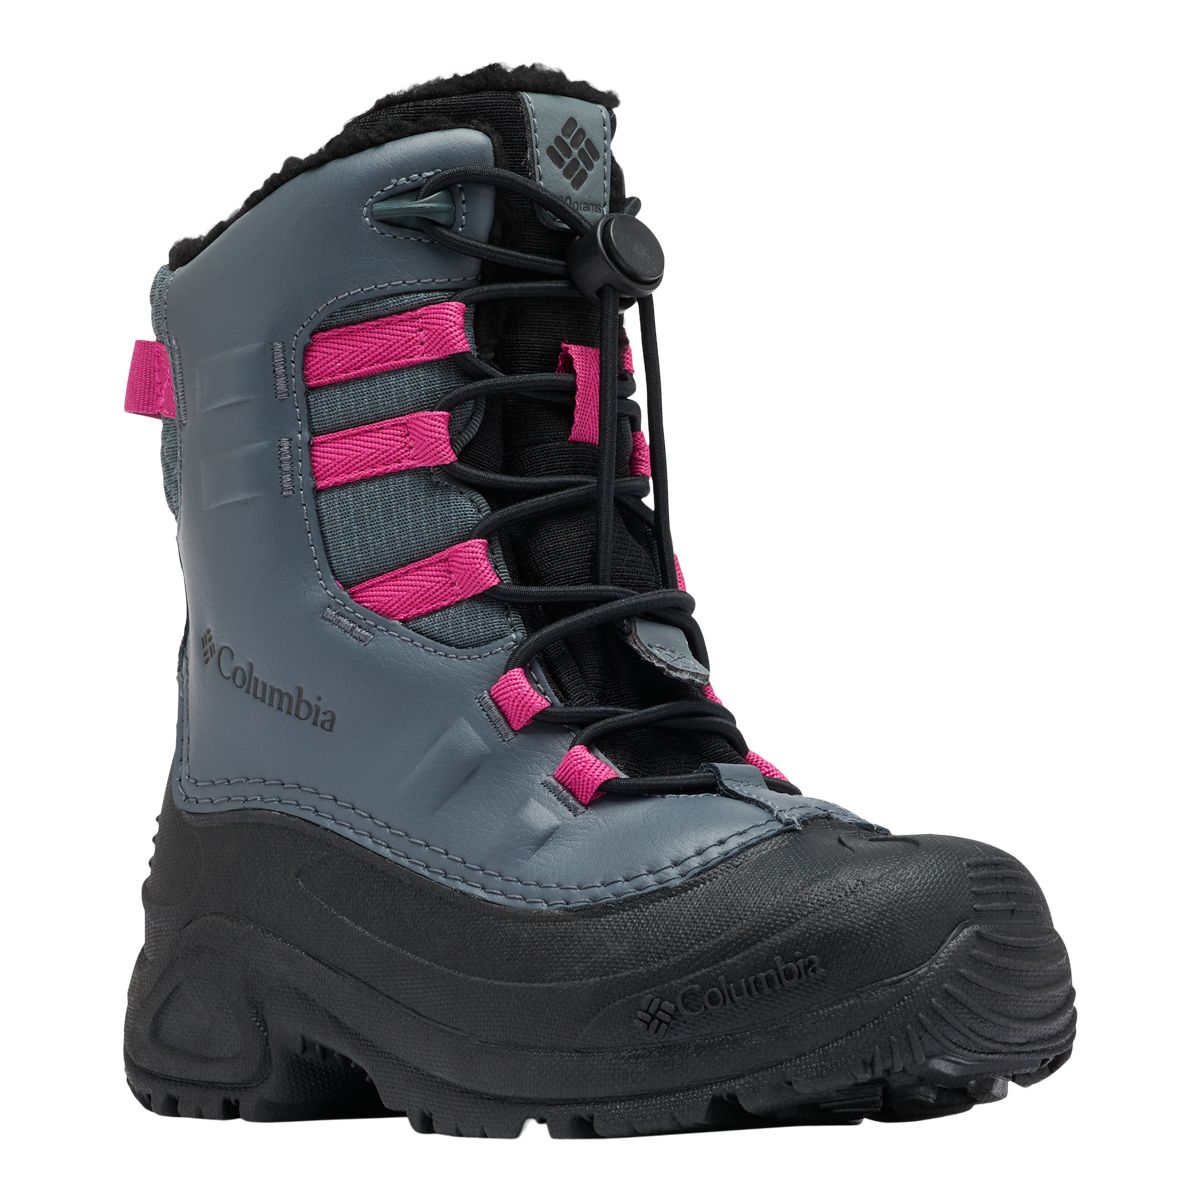 Image of Columbia Kids' Youth Bugaboot Celsius Waterproof Insulated Winter Boots